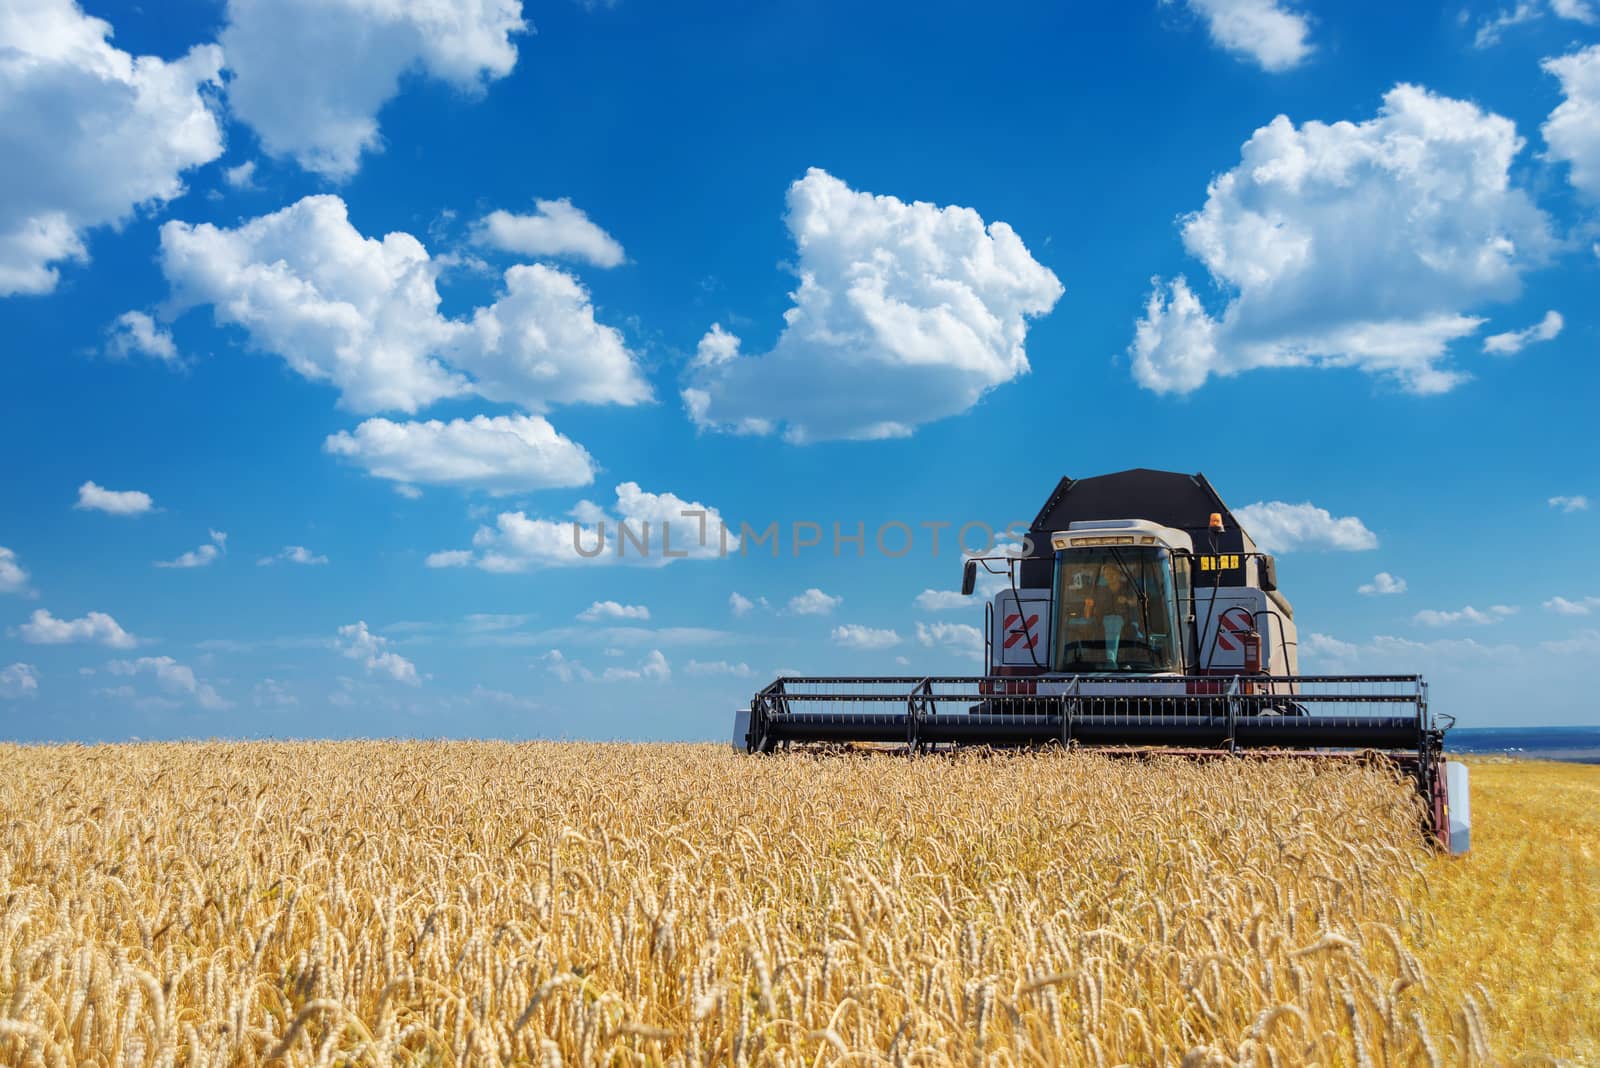 Combine harvester gather the harvest on a large field of ripe wheat against a blue sky with white clouds